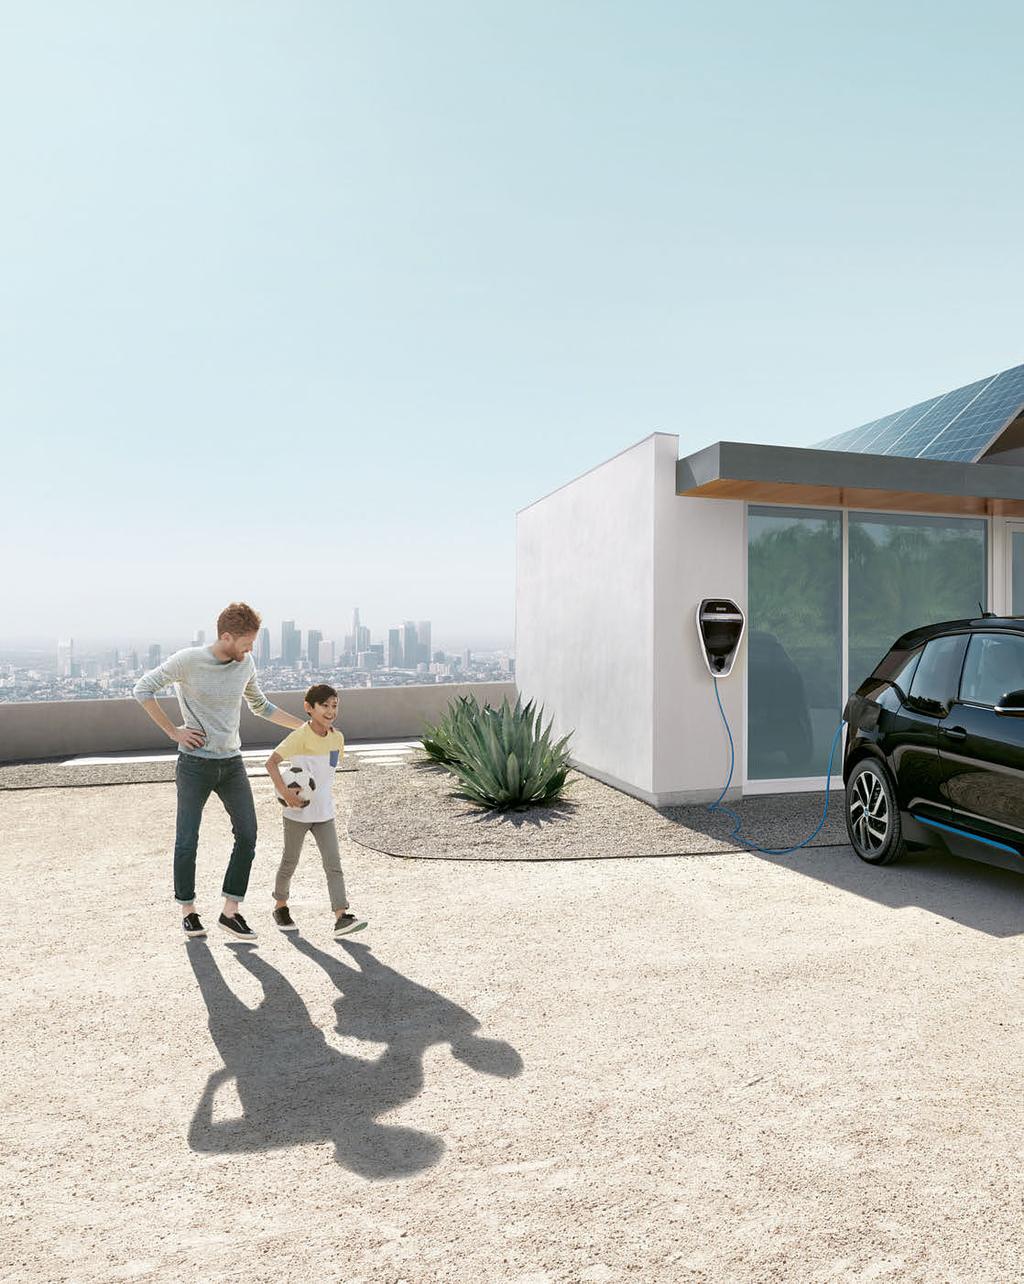 IT CHARGES UP. WHILE YOU RELAX. THE BMW i3 18 19 Charging the battery is simple and there are lots of ways you can do it.